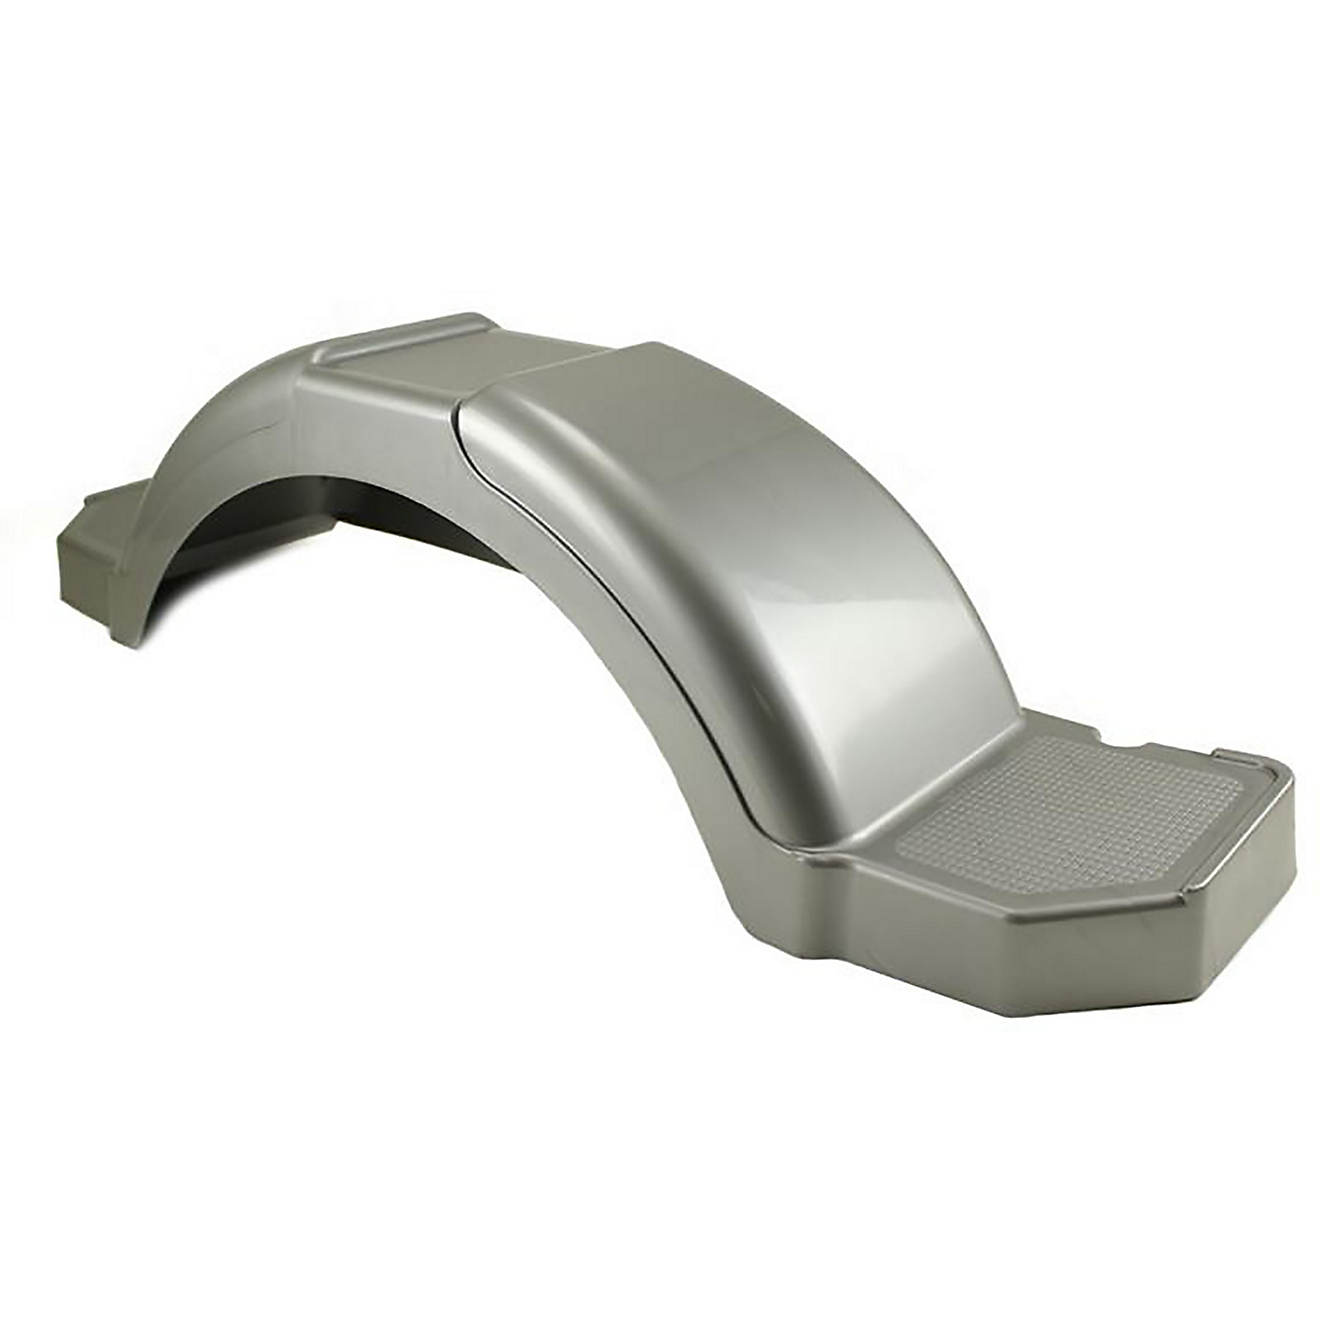 C.E. SMITH PLASTIC FENDER, 37-3/8"X  8-7/8"X 9-1/2", WITH STEP PAD AND SKIRT, FITS 12"TIRES, 300 LBS                             - view number 1